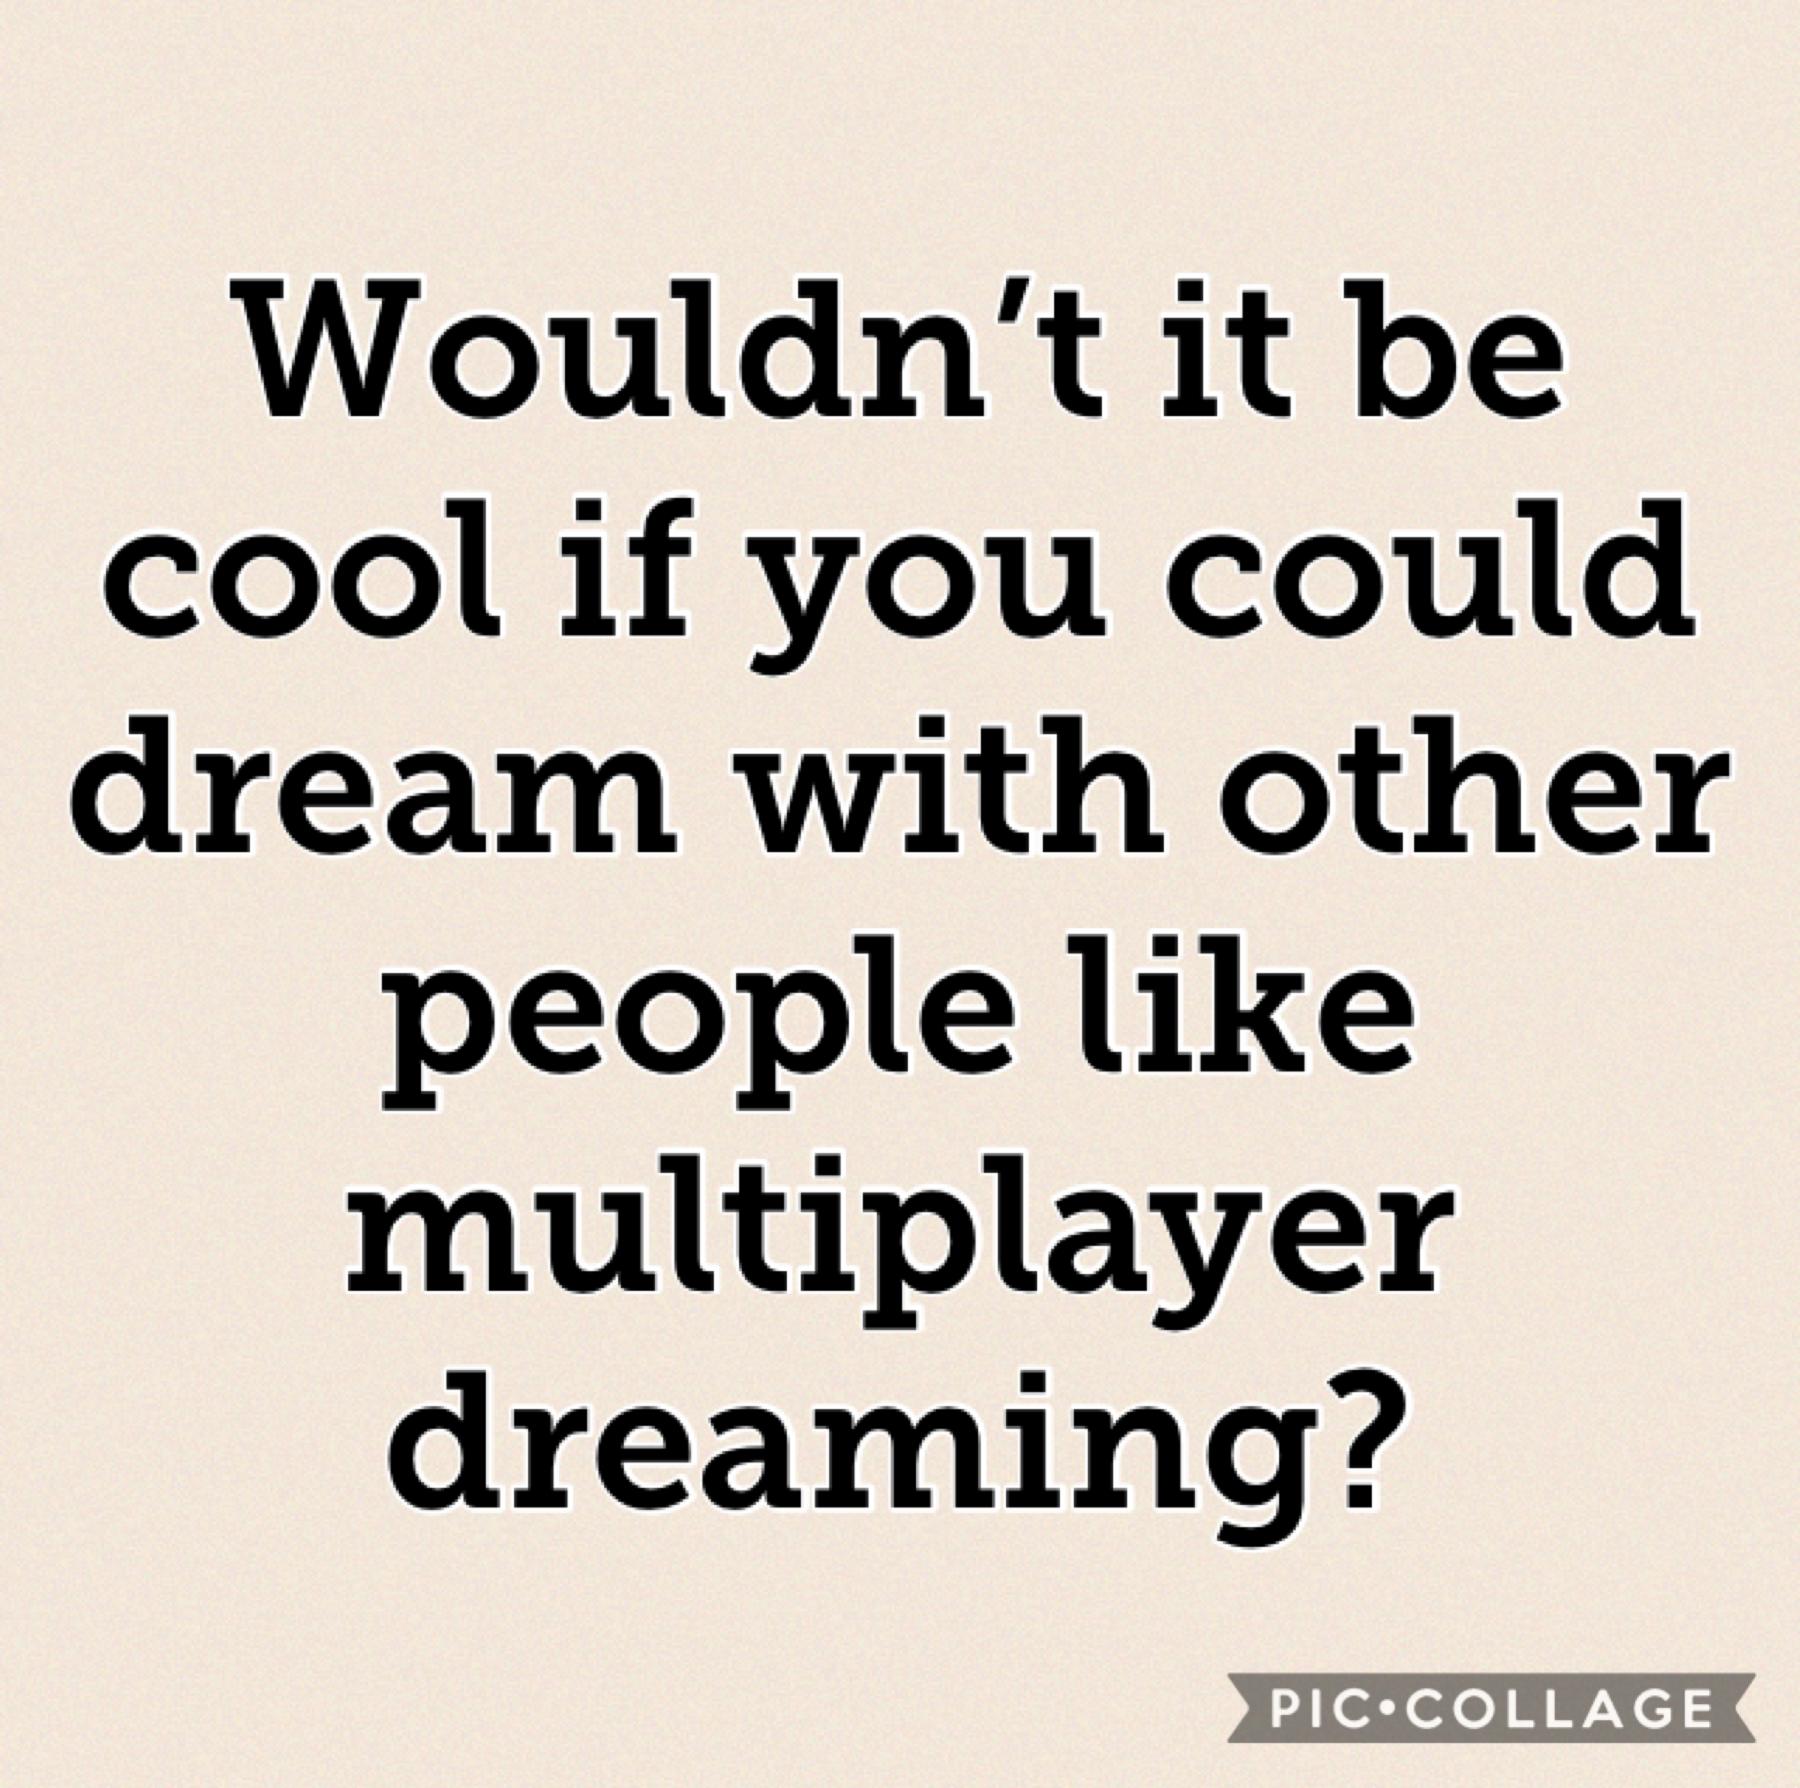 Comment if you think this would be cool too!